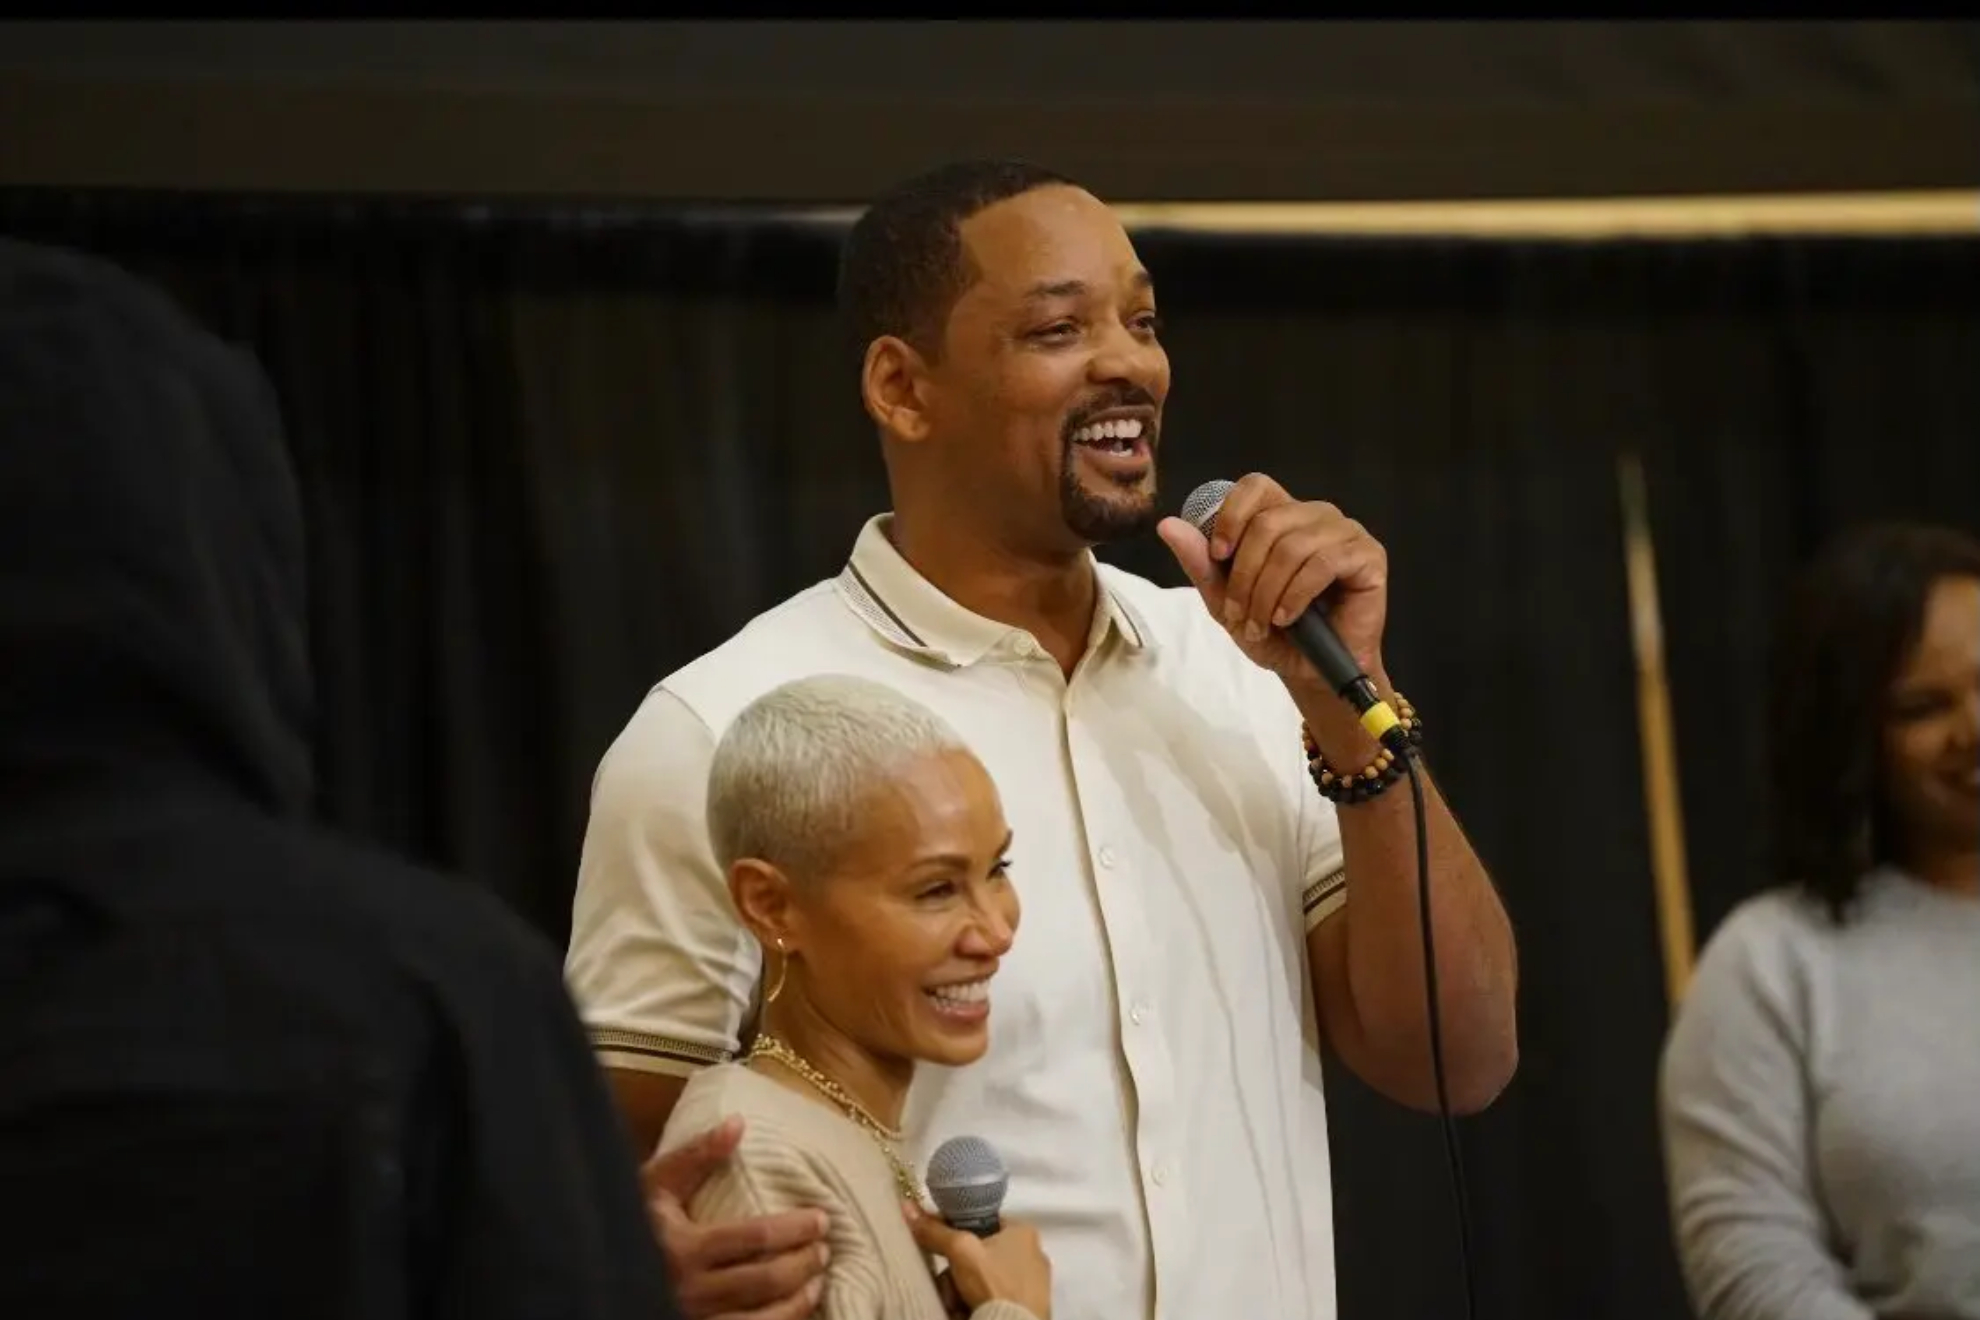 Will Smith shows support for Jada Pinkett Smith at book signing event